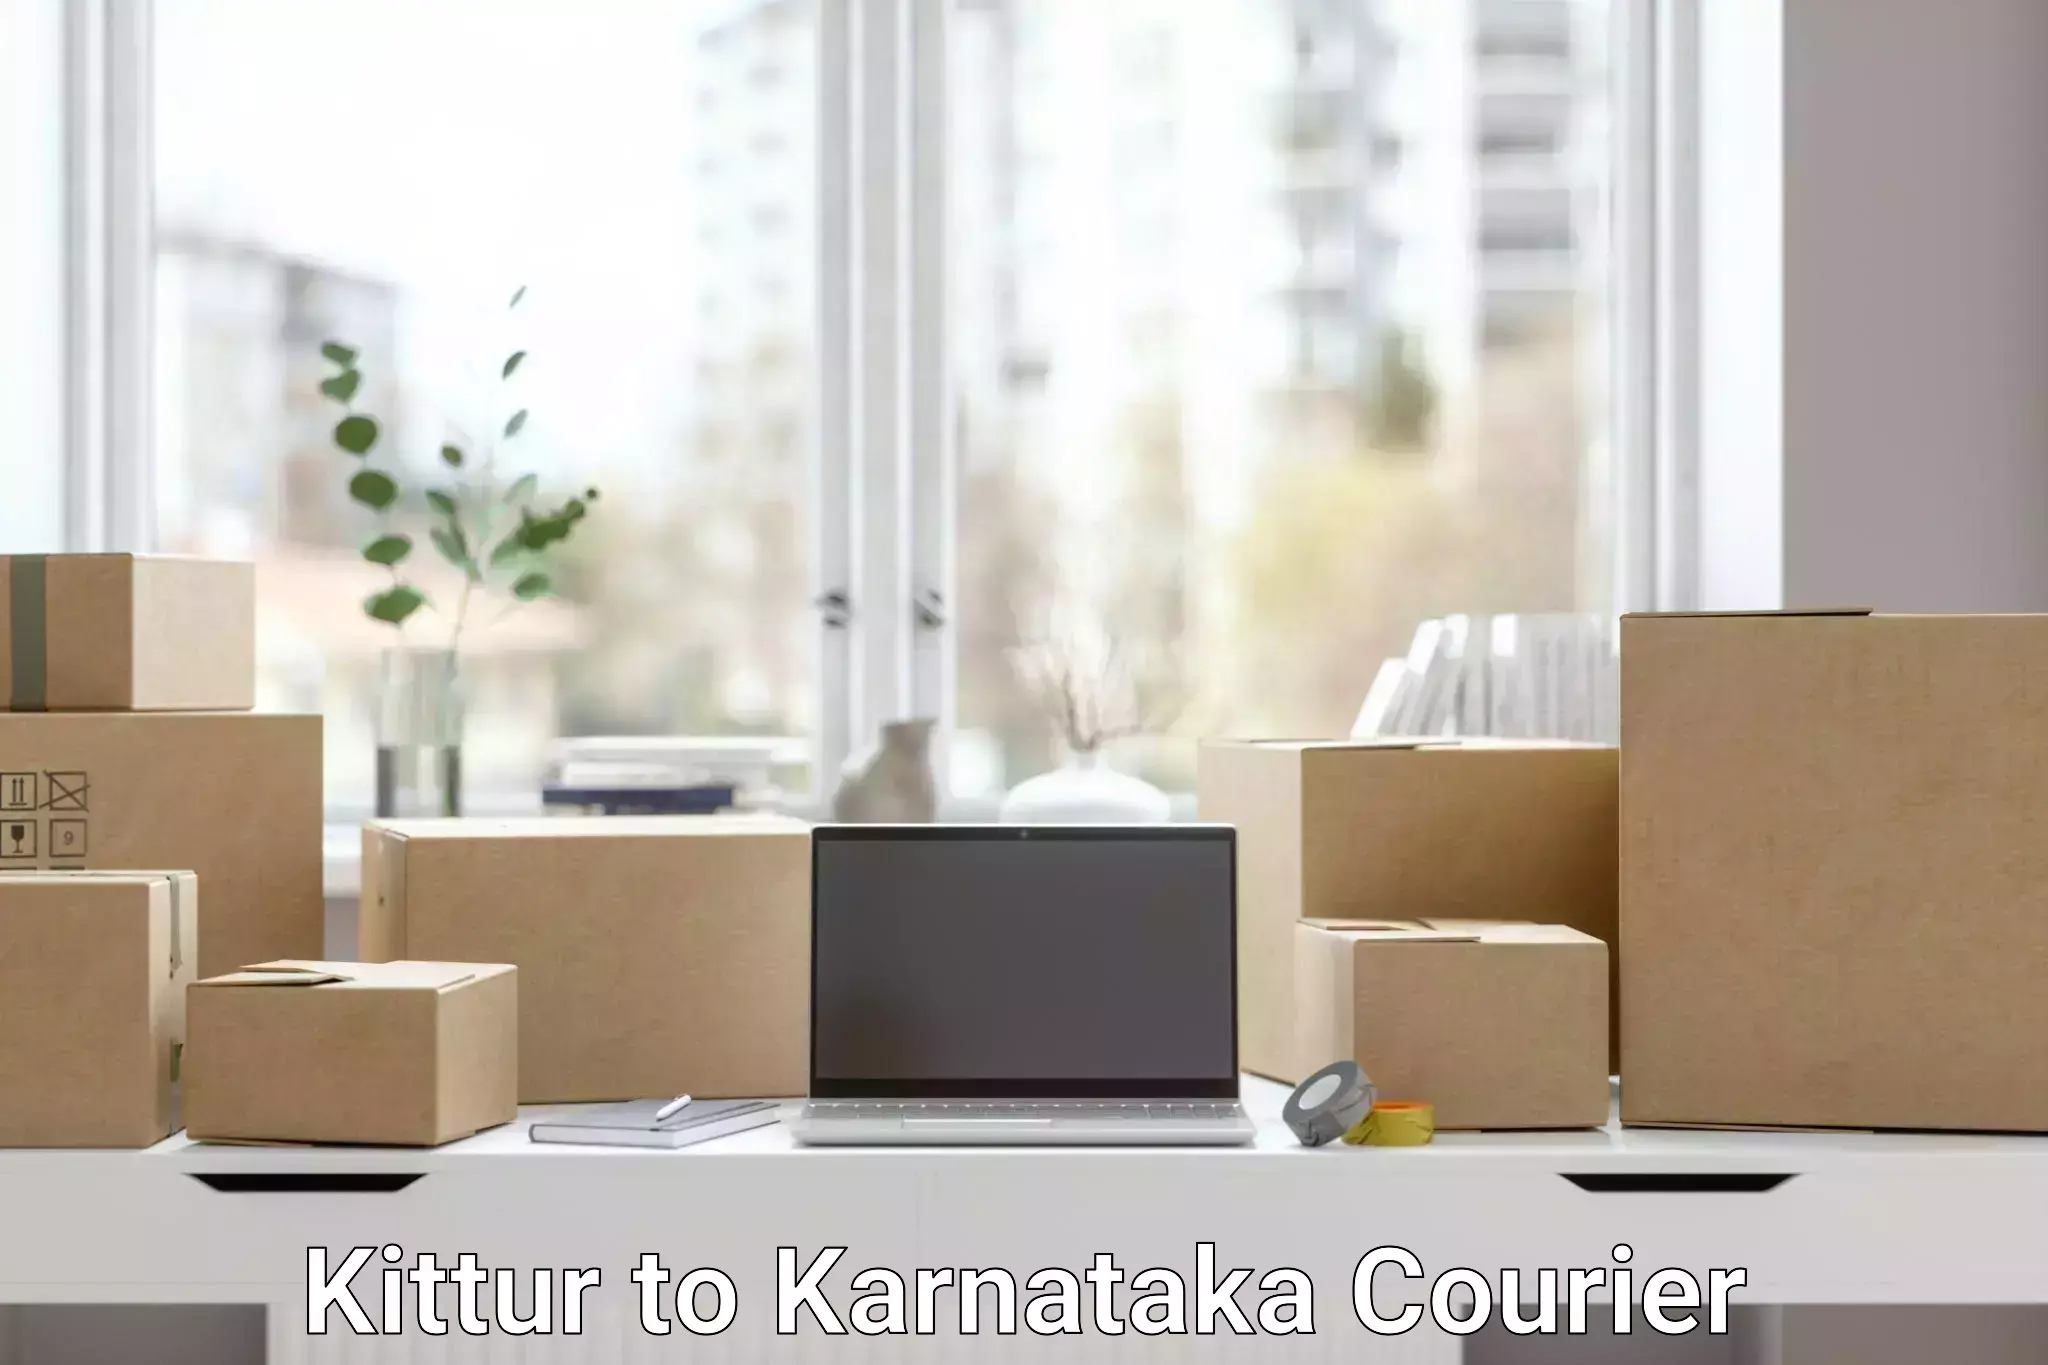 Professional courier handling Kittur to Channapatna